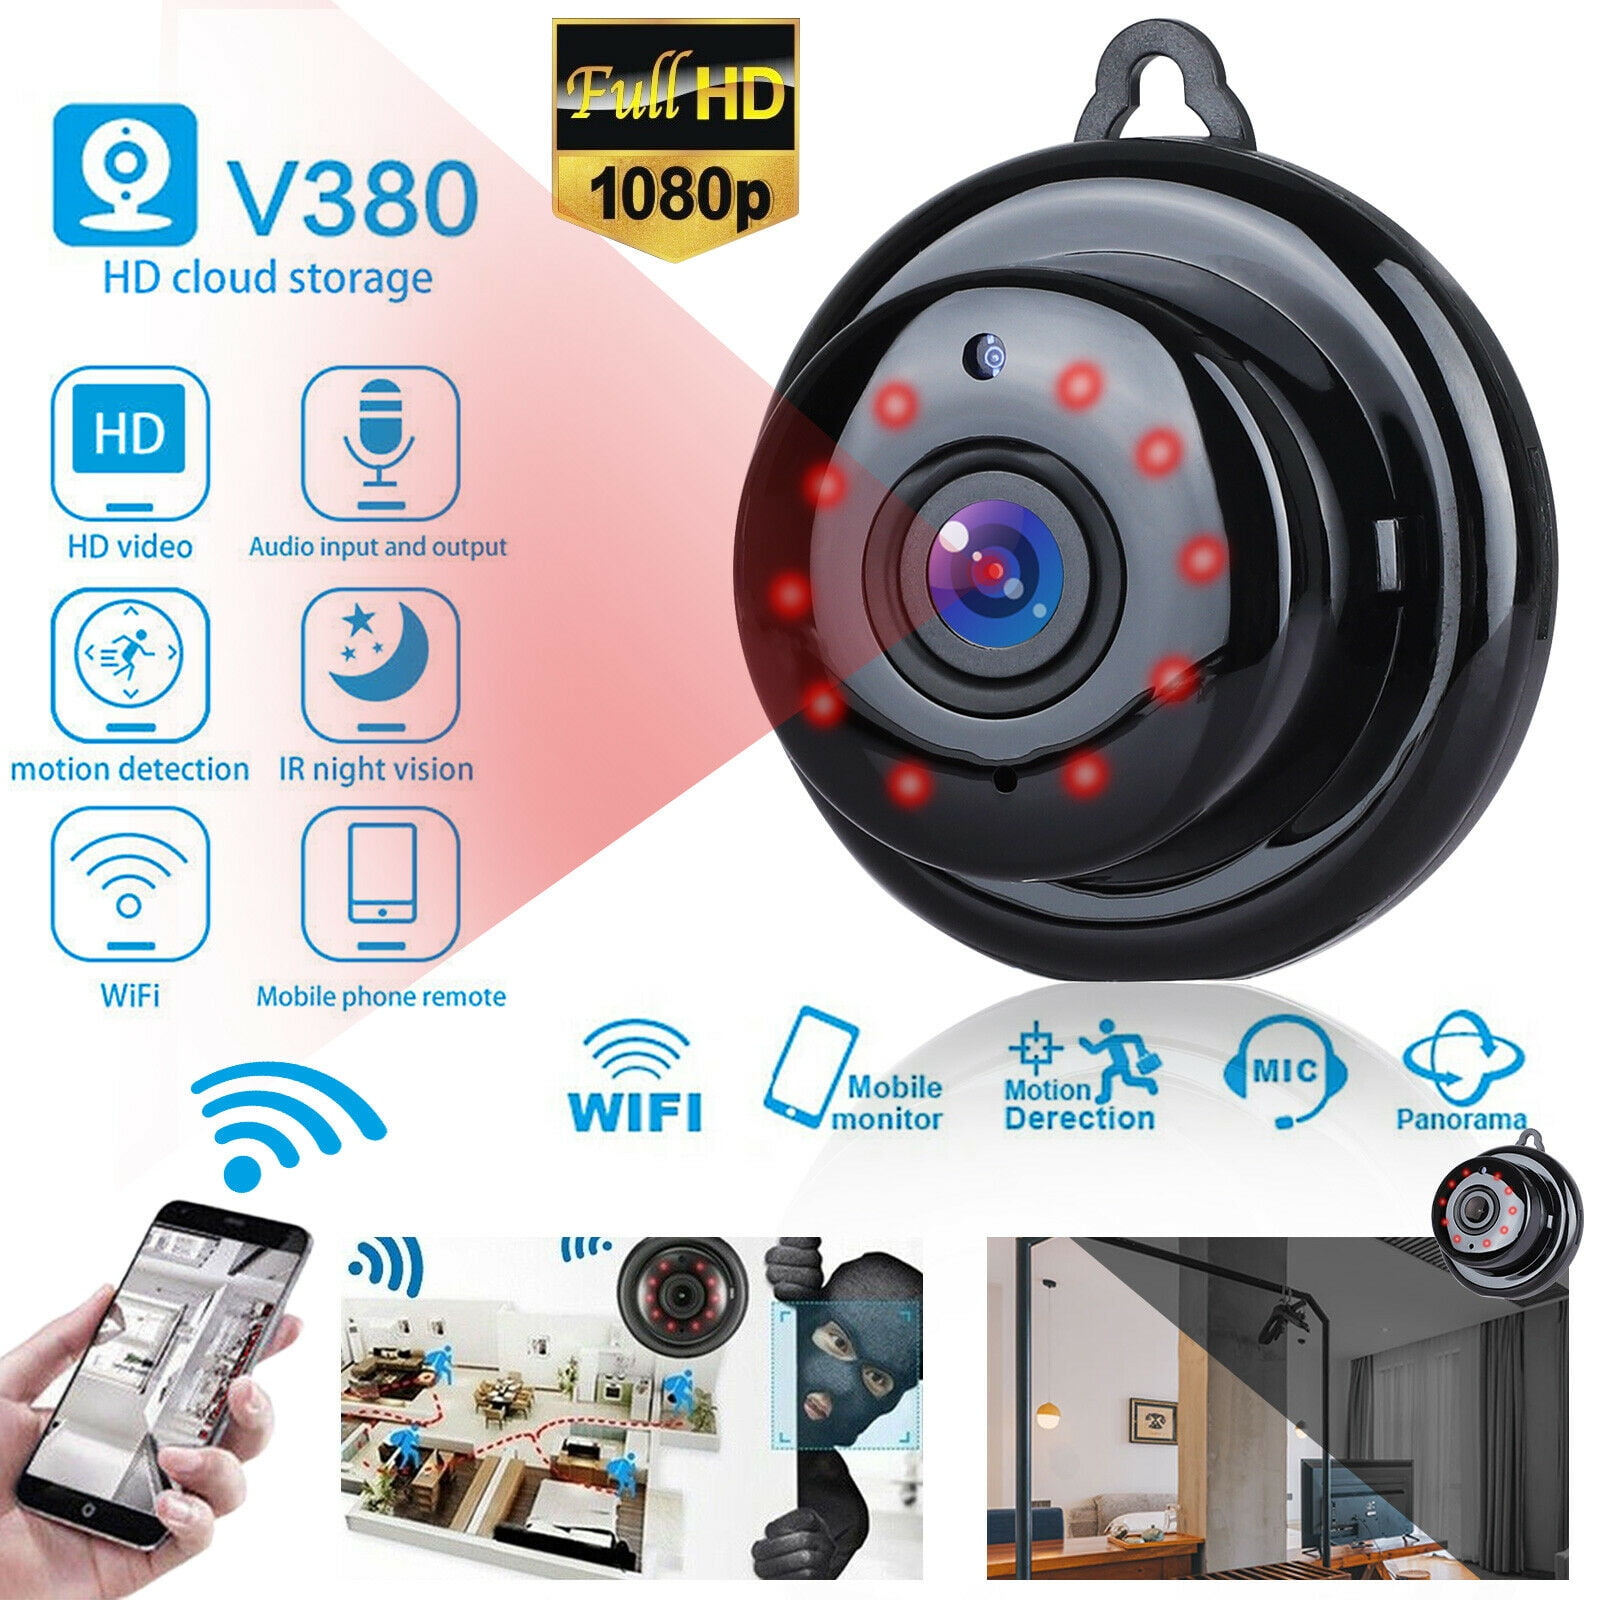 Blueseao HD 1080P Security Camera with Night Version Motion Dection Two-Way Audio US STOCK WIFI Monitor Camera 